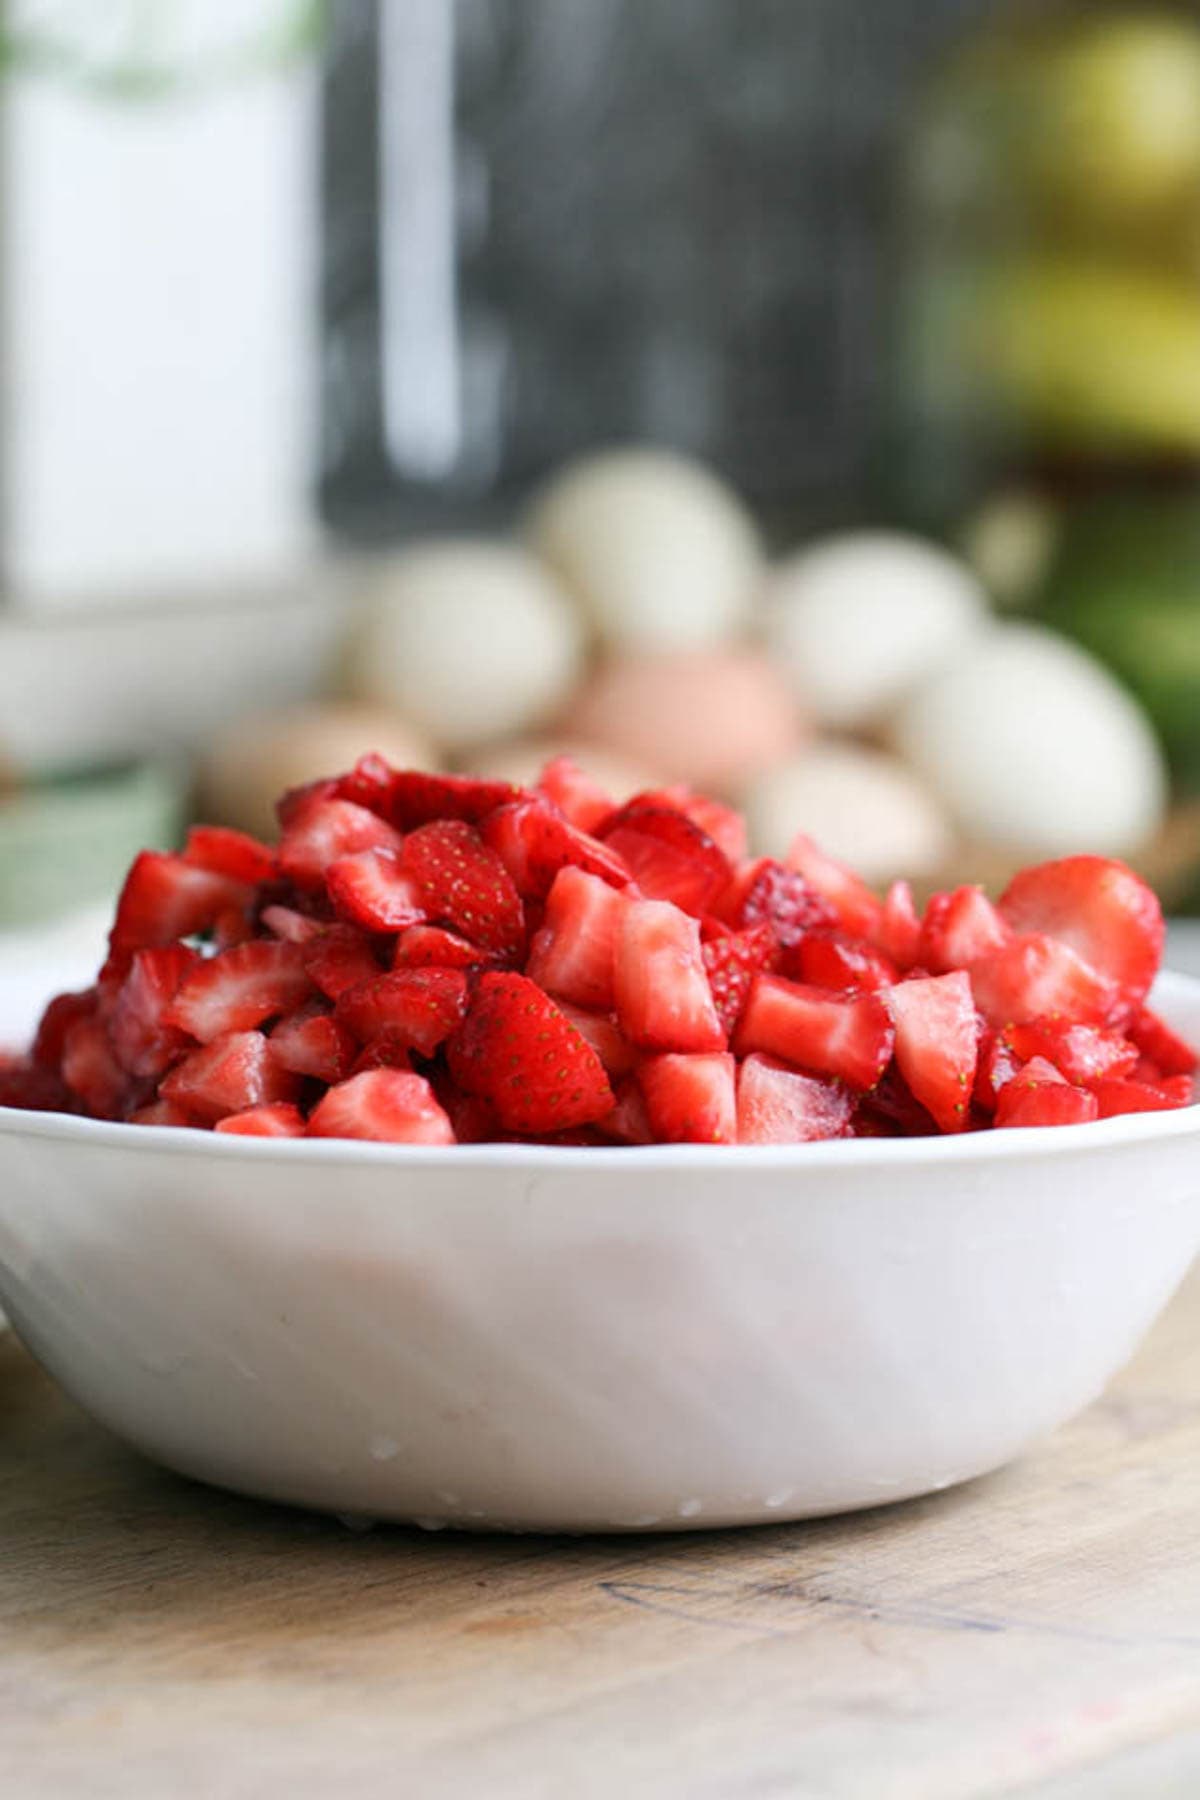 Diced strawberries ready to be added to the batter.